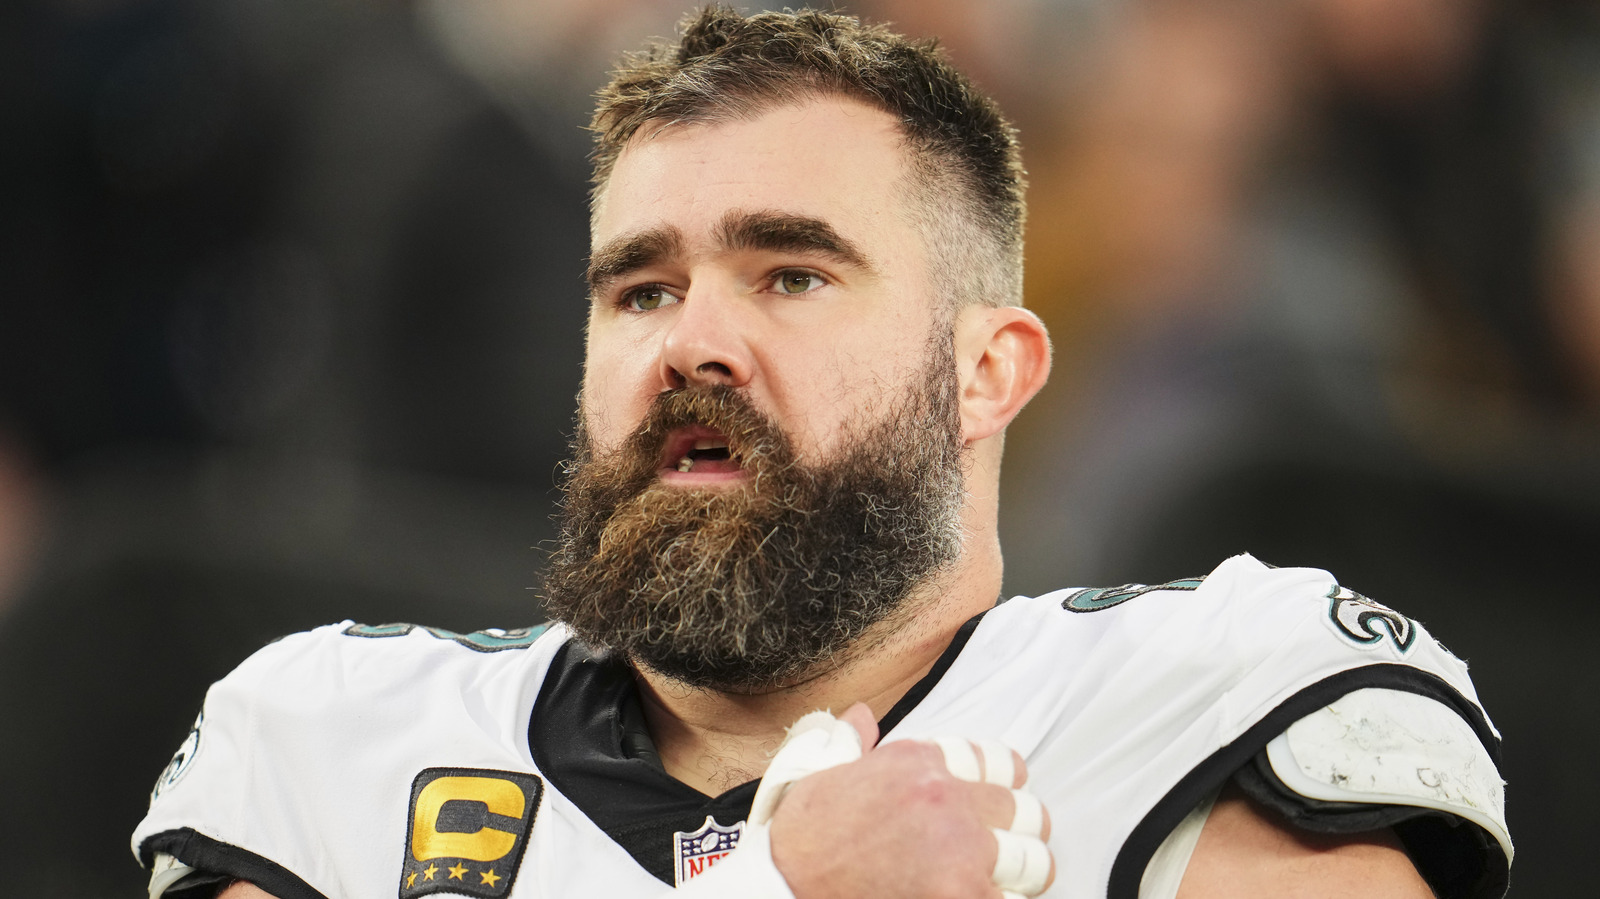 How Jason Kelce's Wife Reacted To His Shirtless NFL Game Stunt